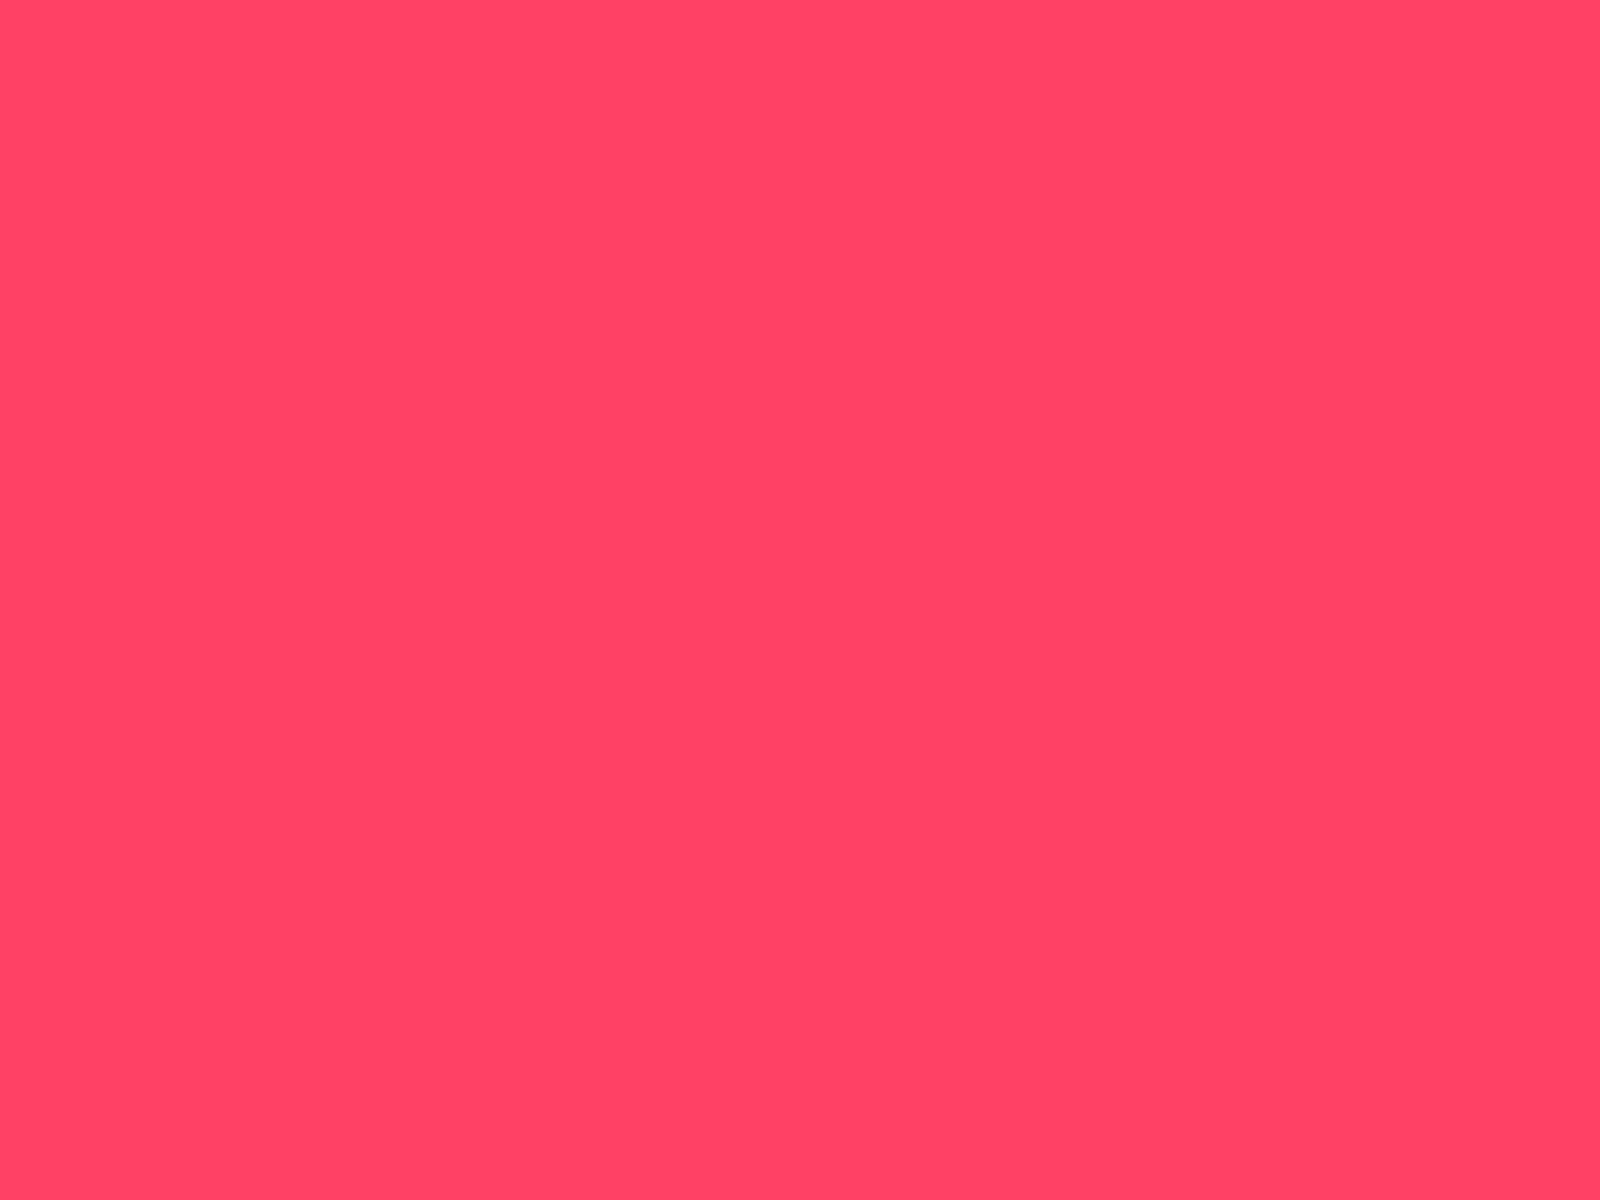  1600x1200 resolution Neon Fuchsia solid color background view